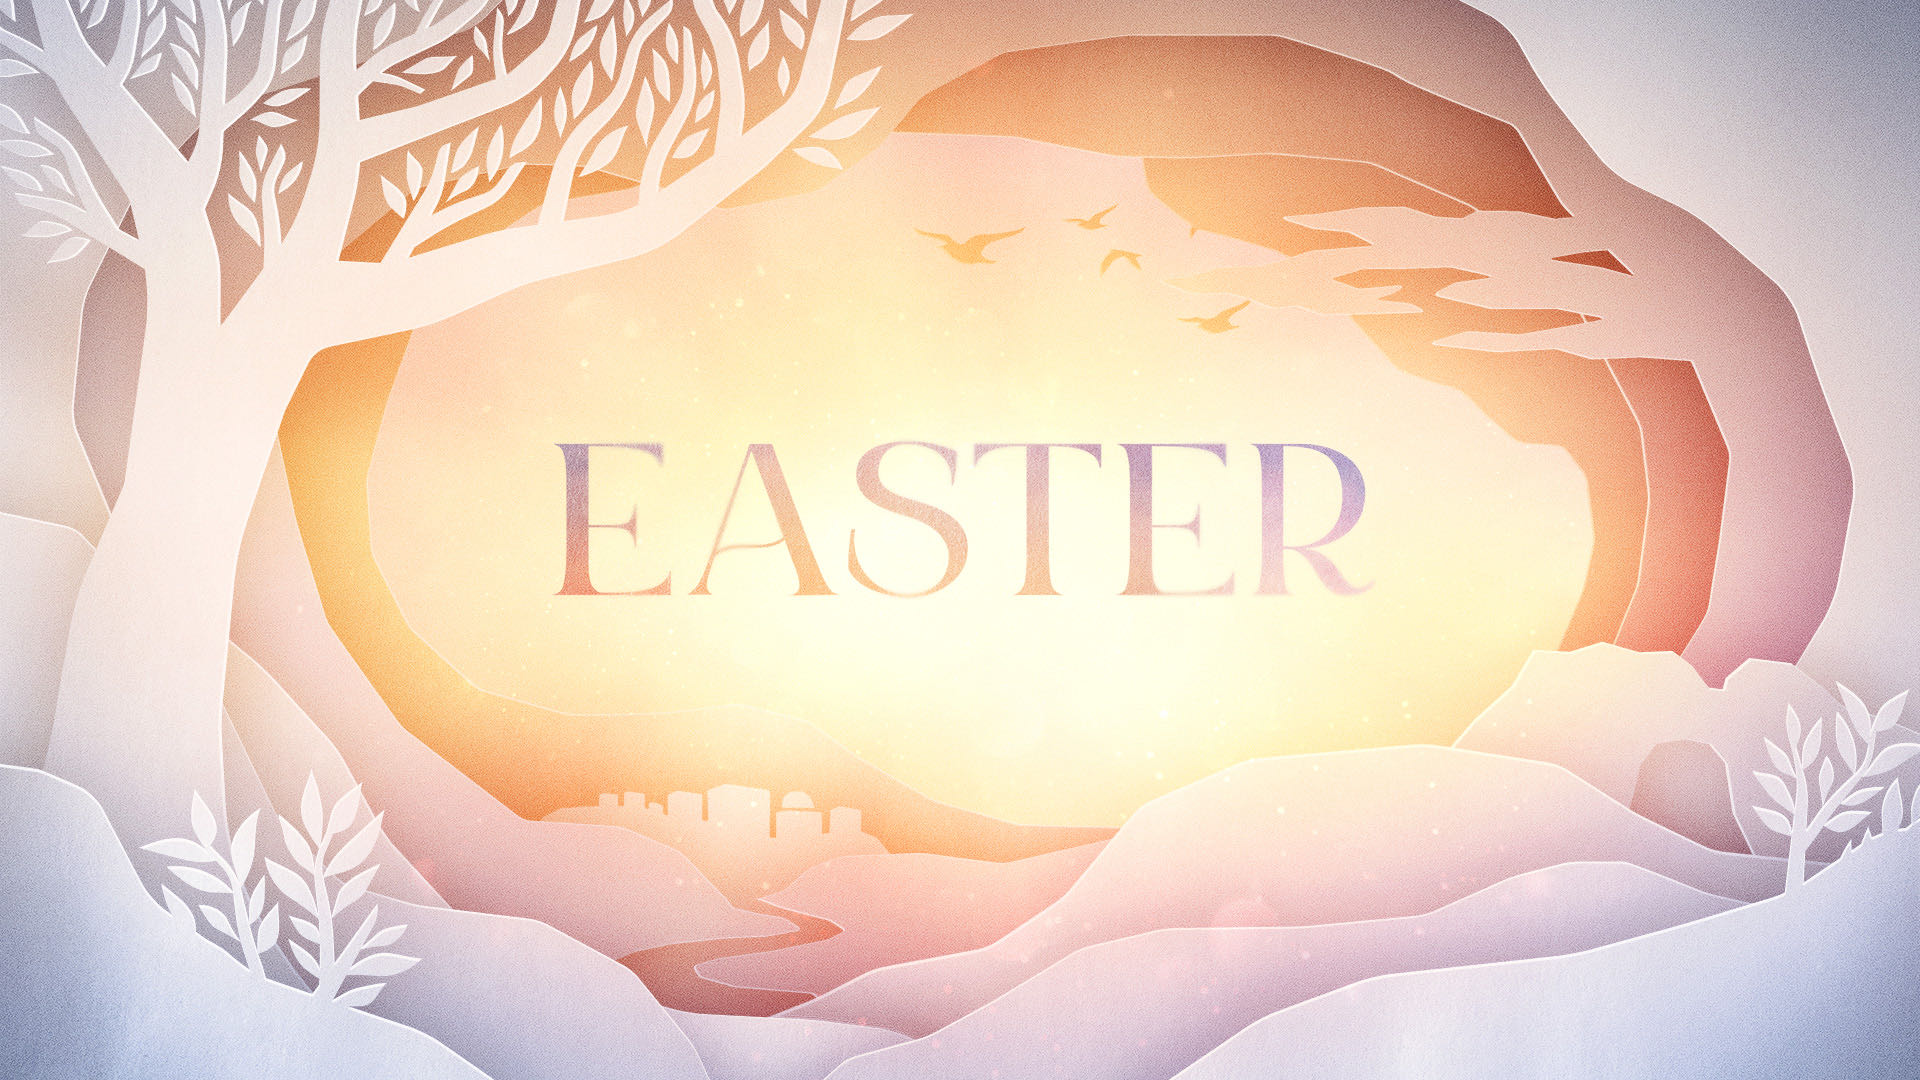 Easter Matters